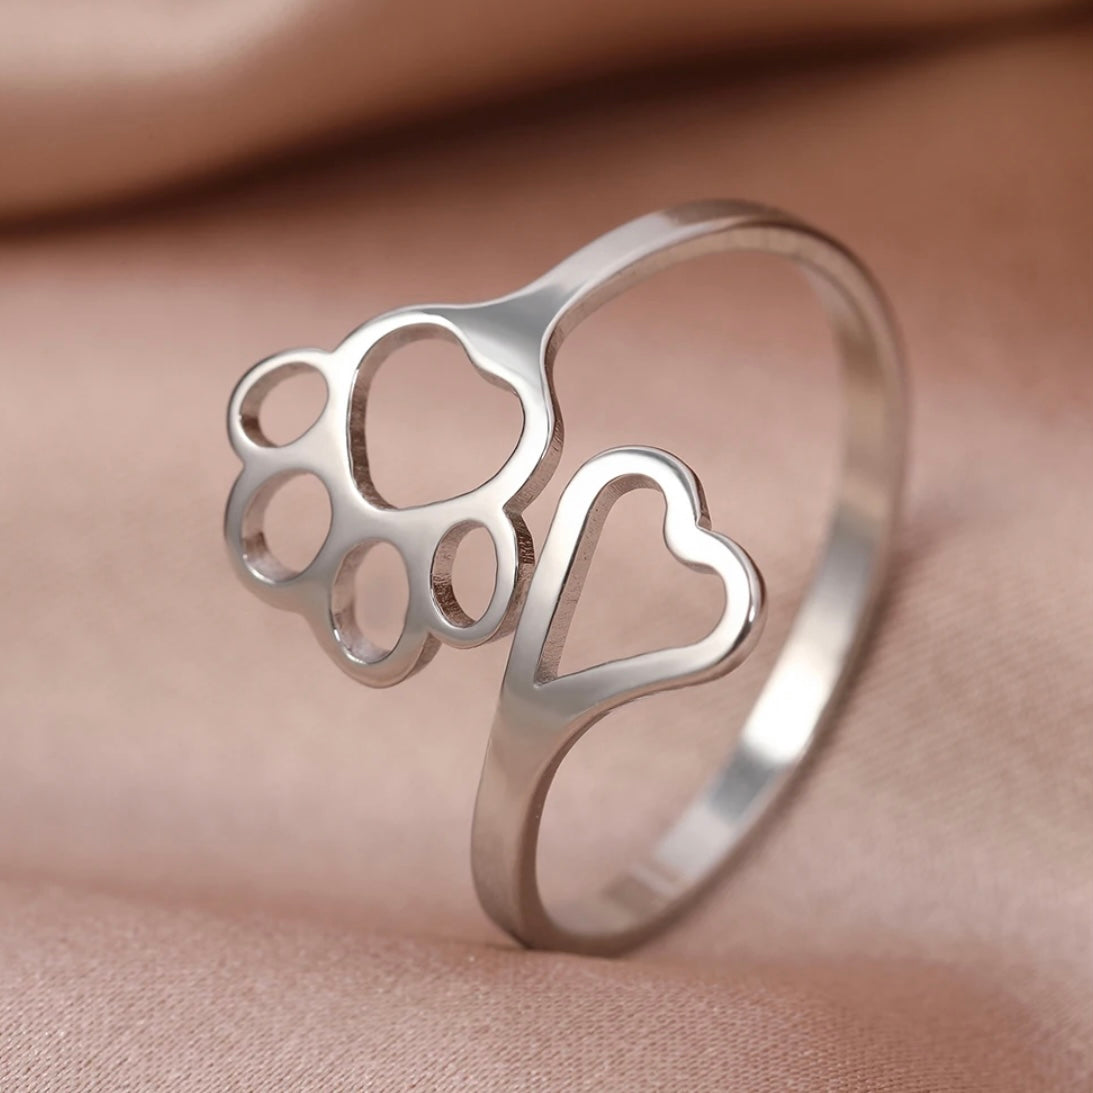 Pets remembrance ring